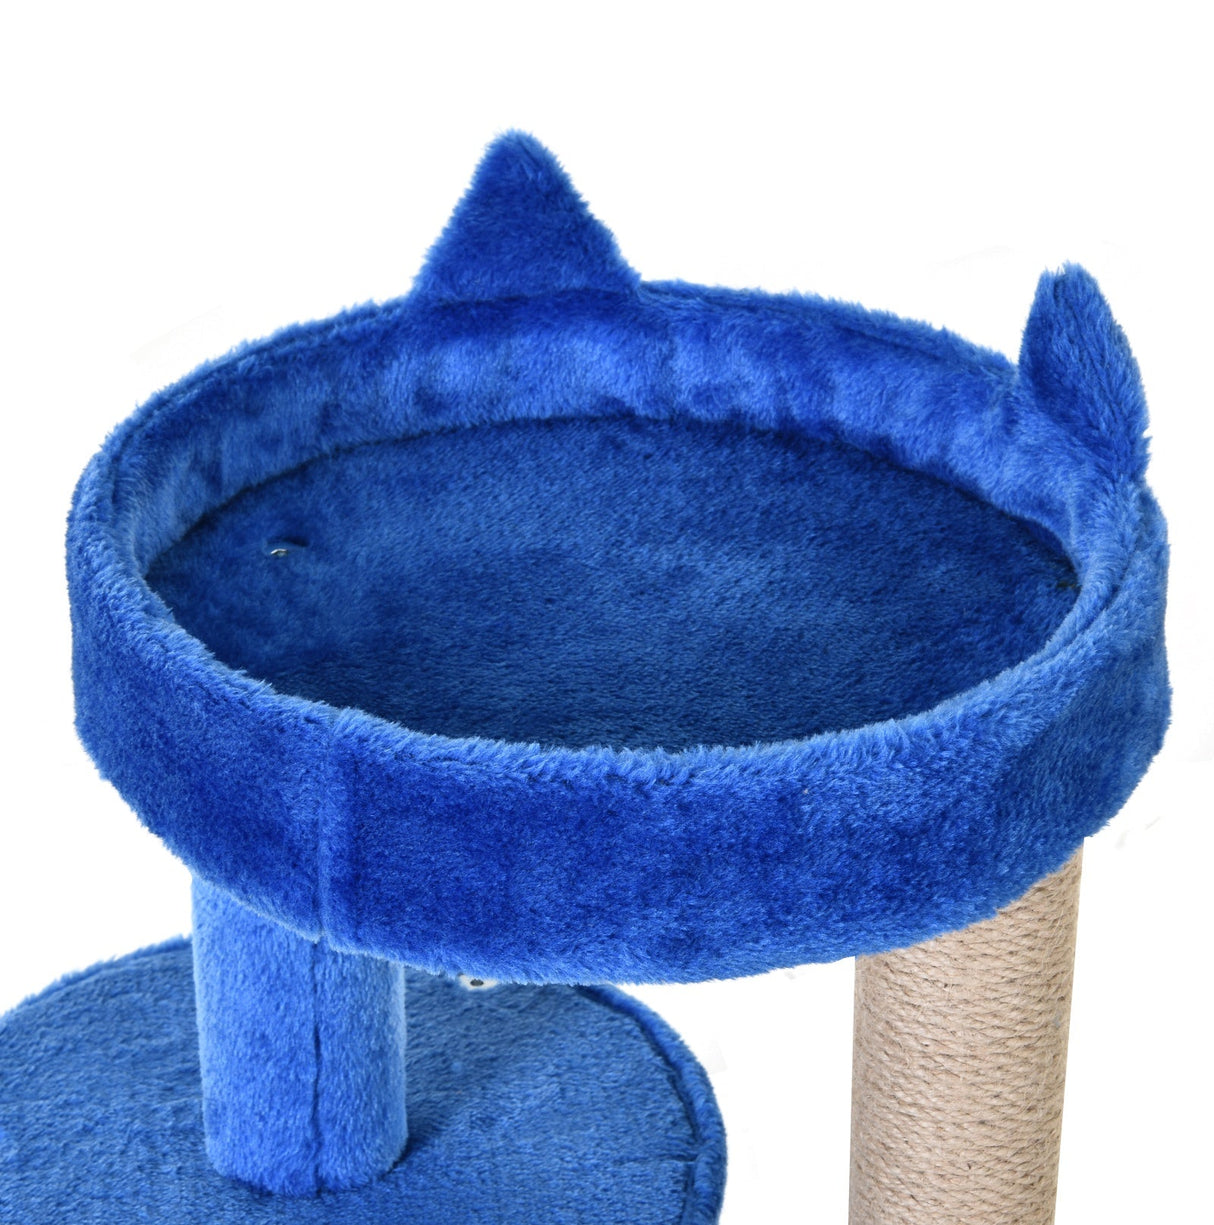 104cm Cat Tree Tower with Condo, Perch & Scratch Posts, PawHut, Blue